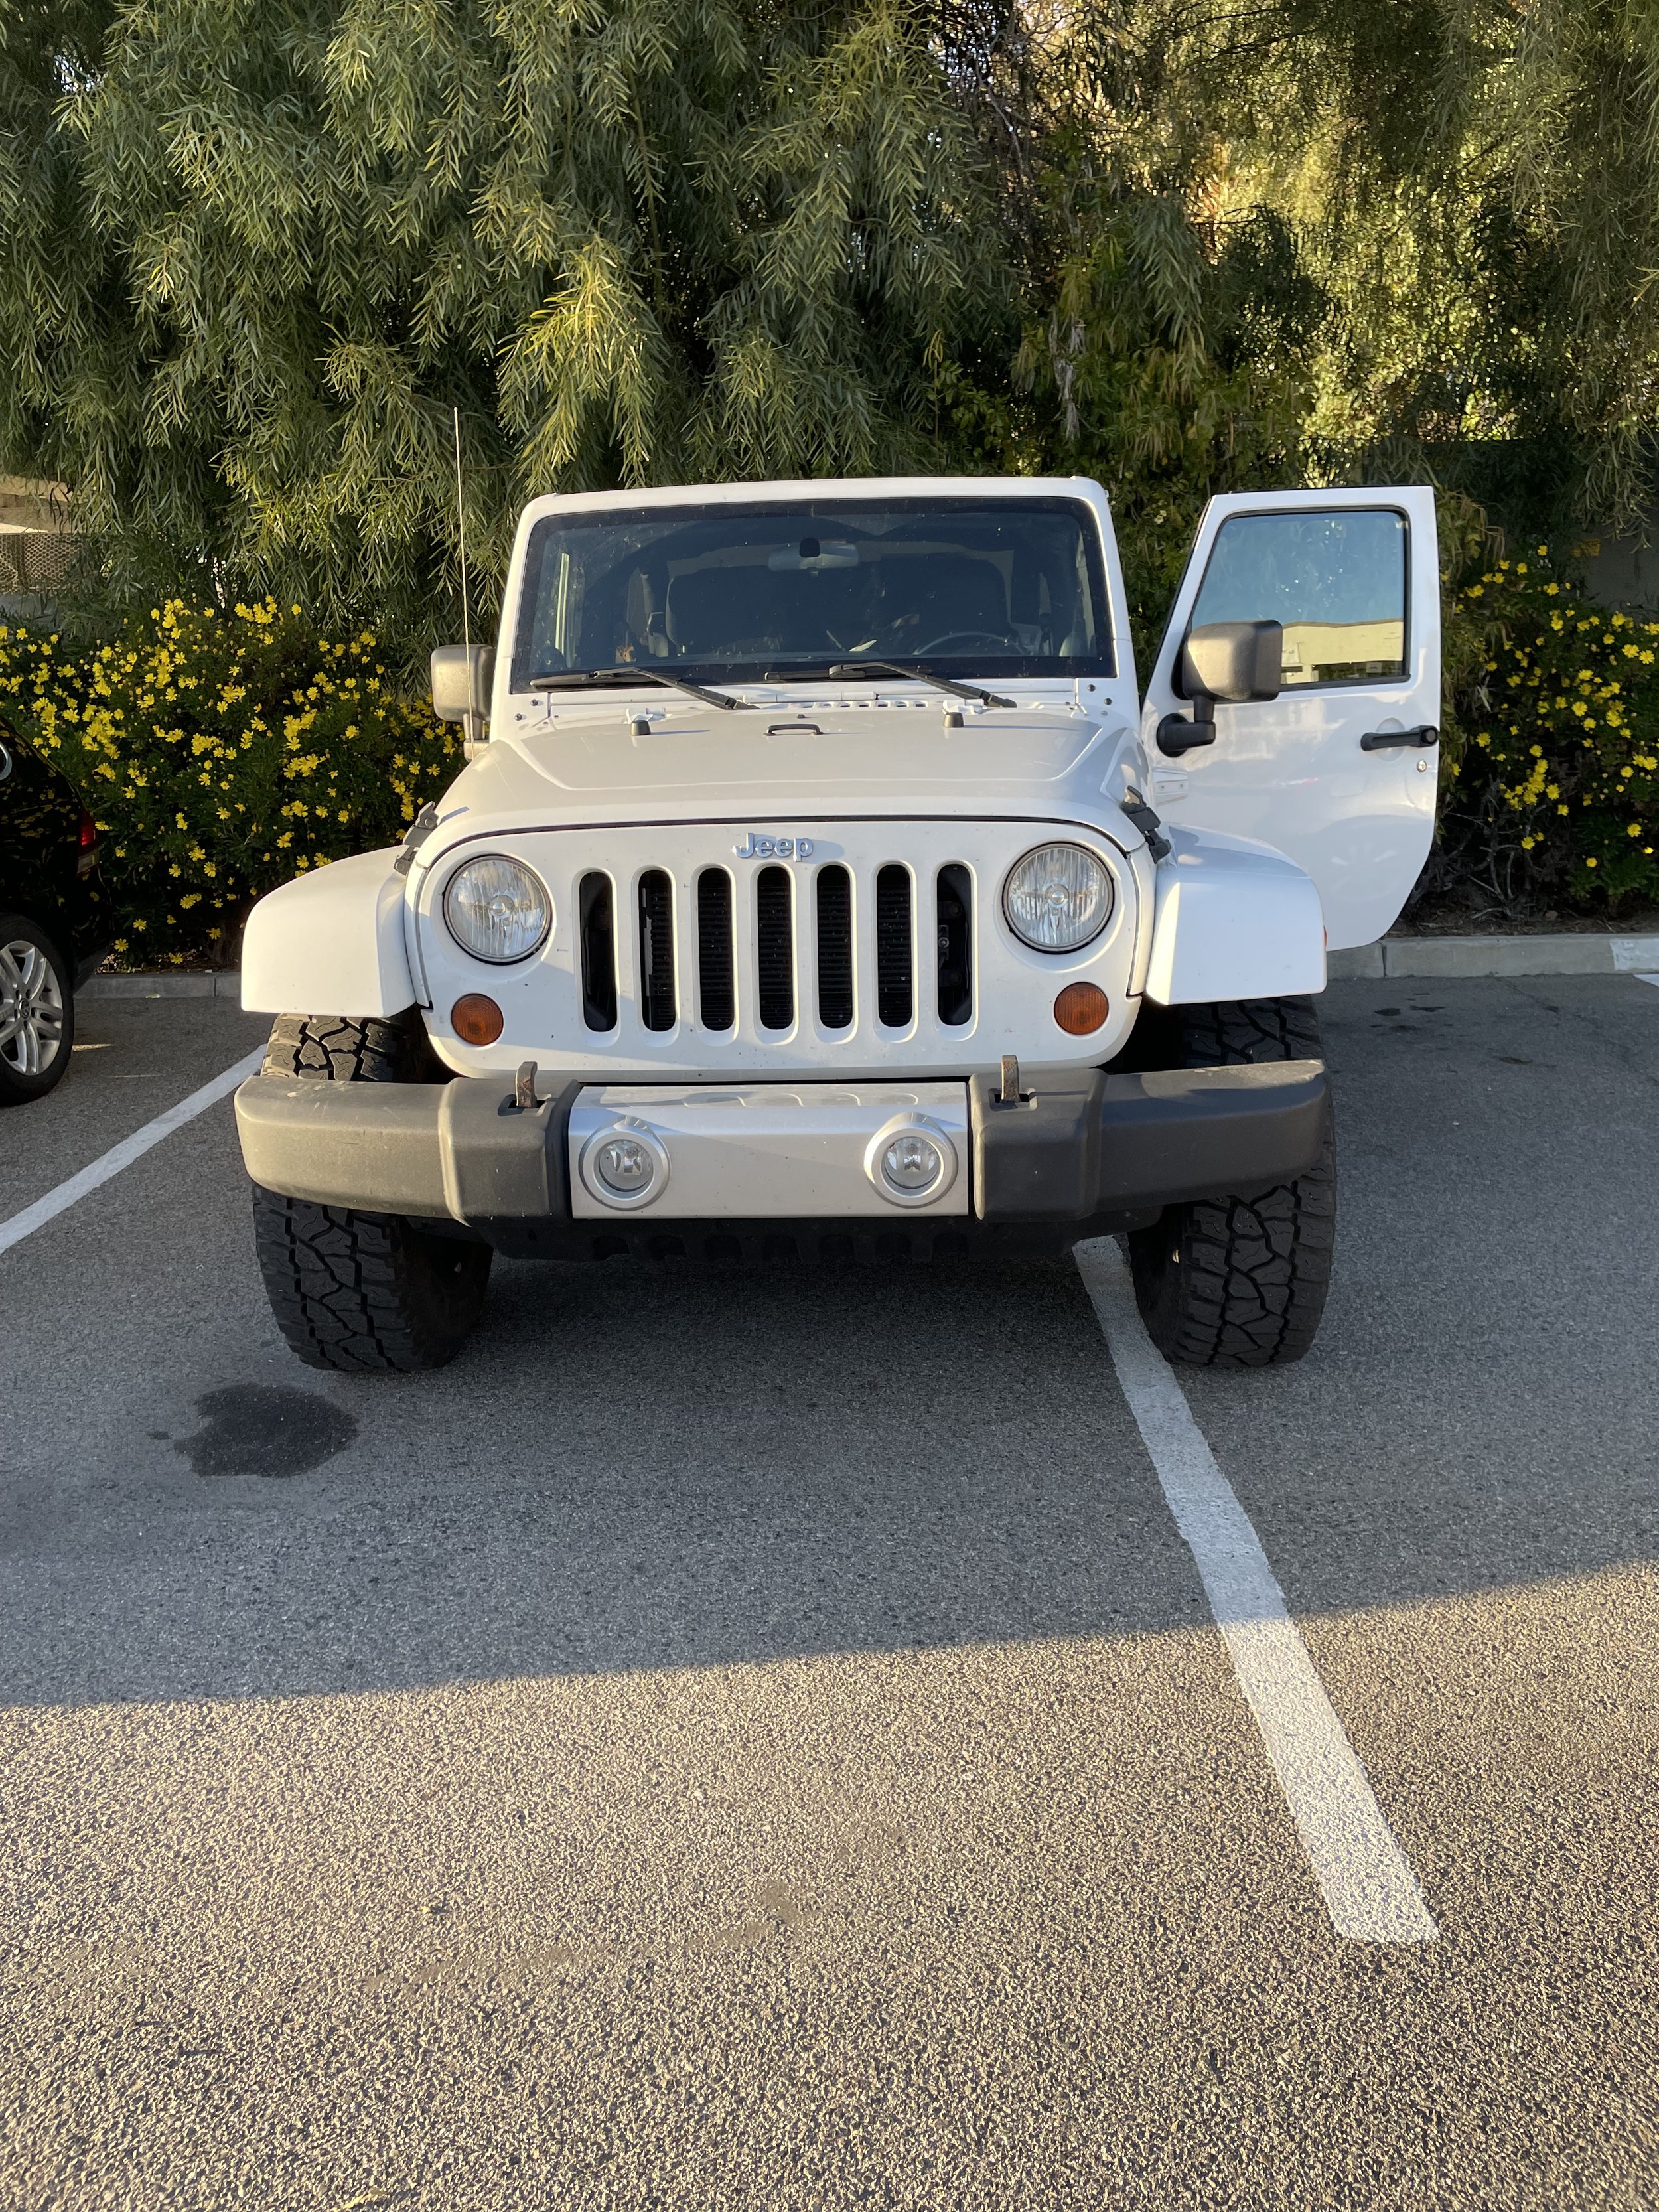 I'm consistently bad at parking, ok? Can we just say it's part of my charm?